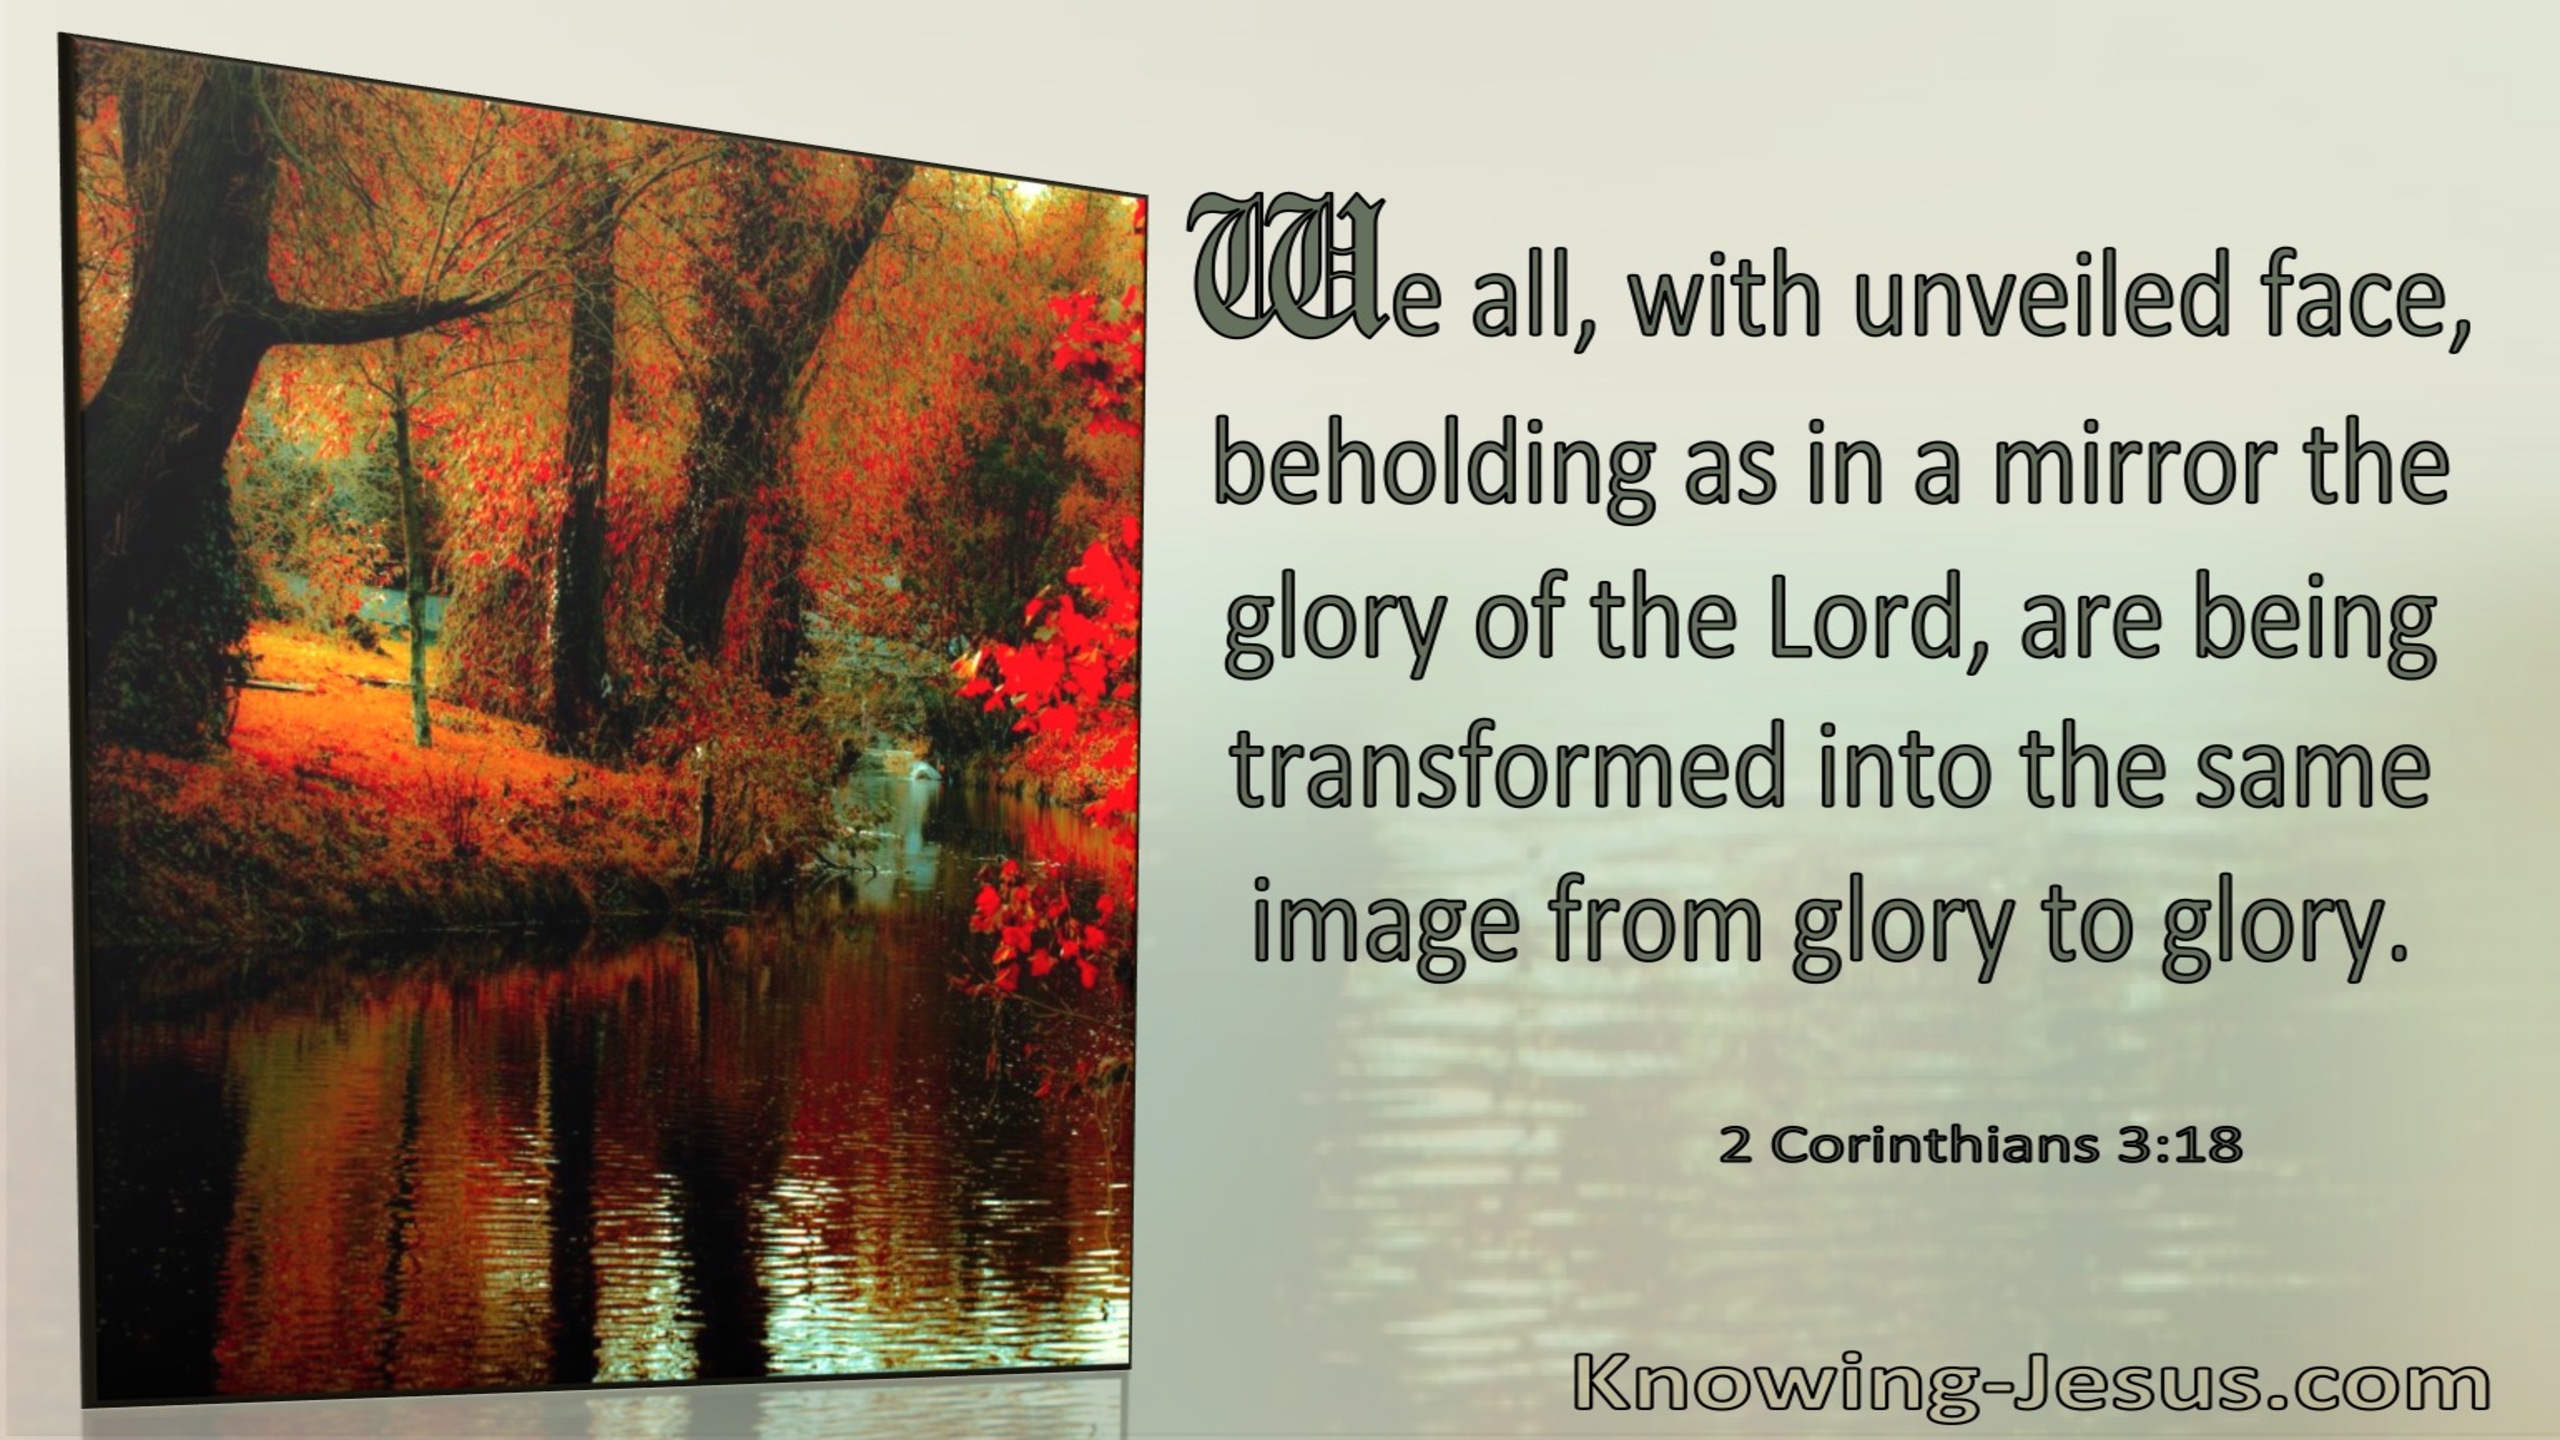 2 Corinthians 3:18 We Are Being Transformed Into The Same Image of Glory to Glory (windows)04:08